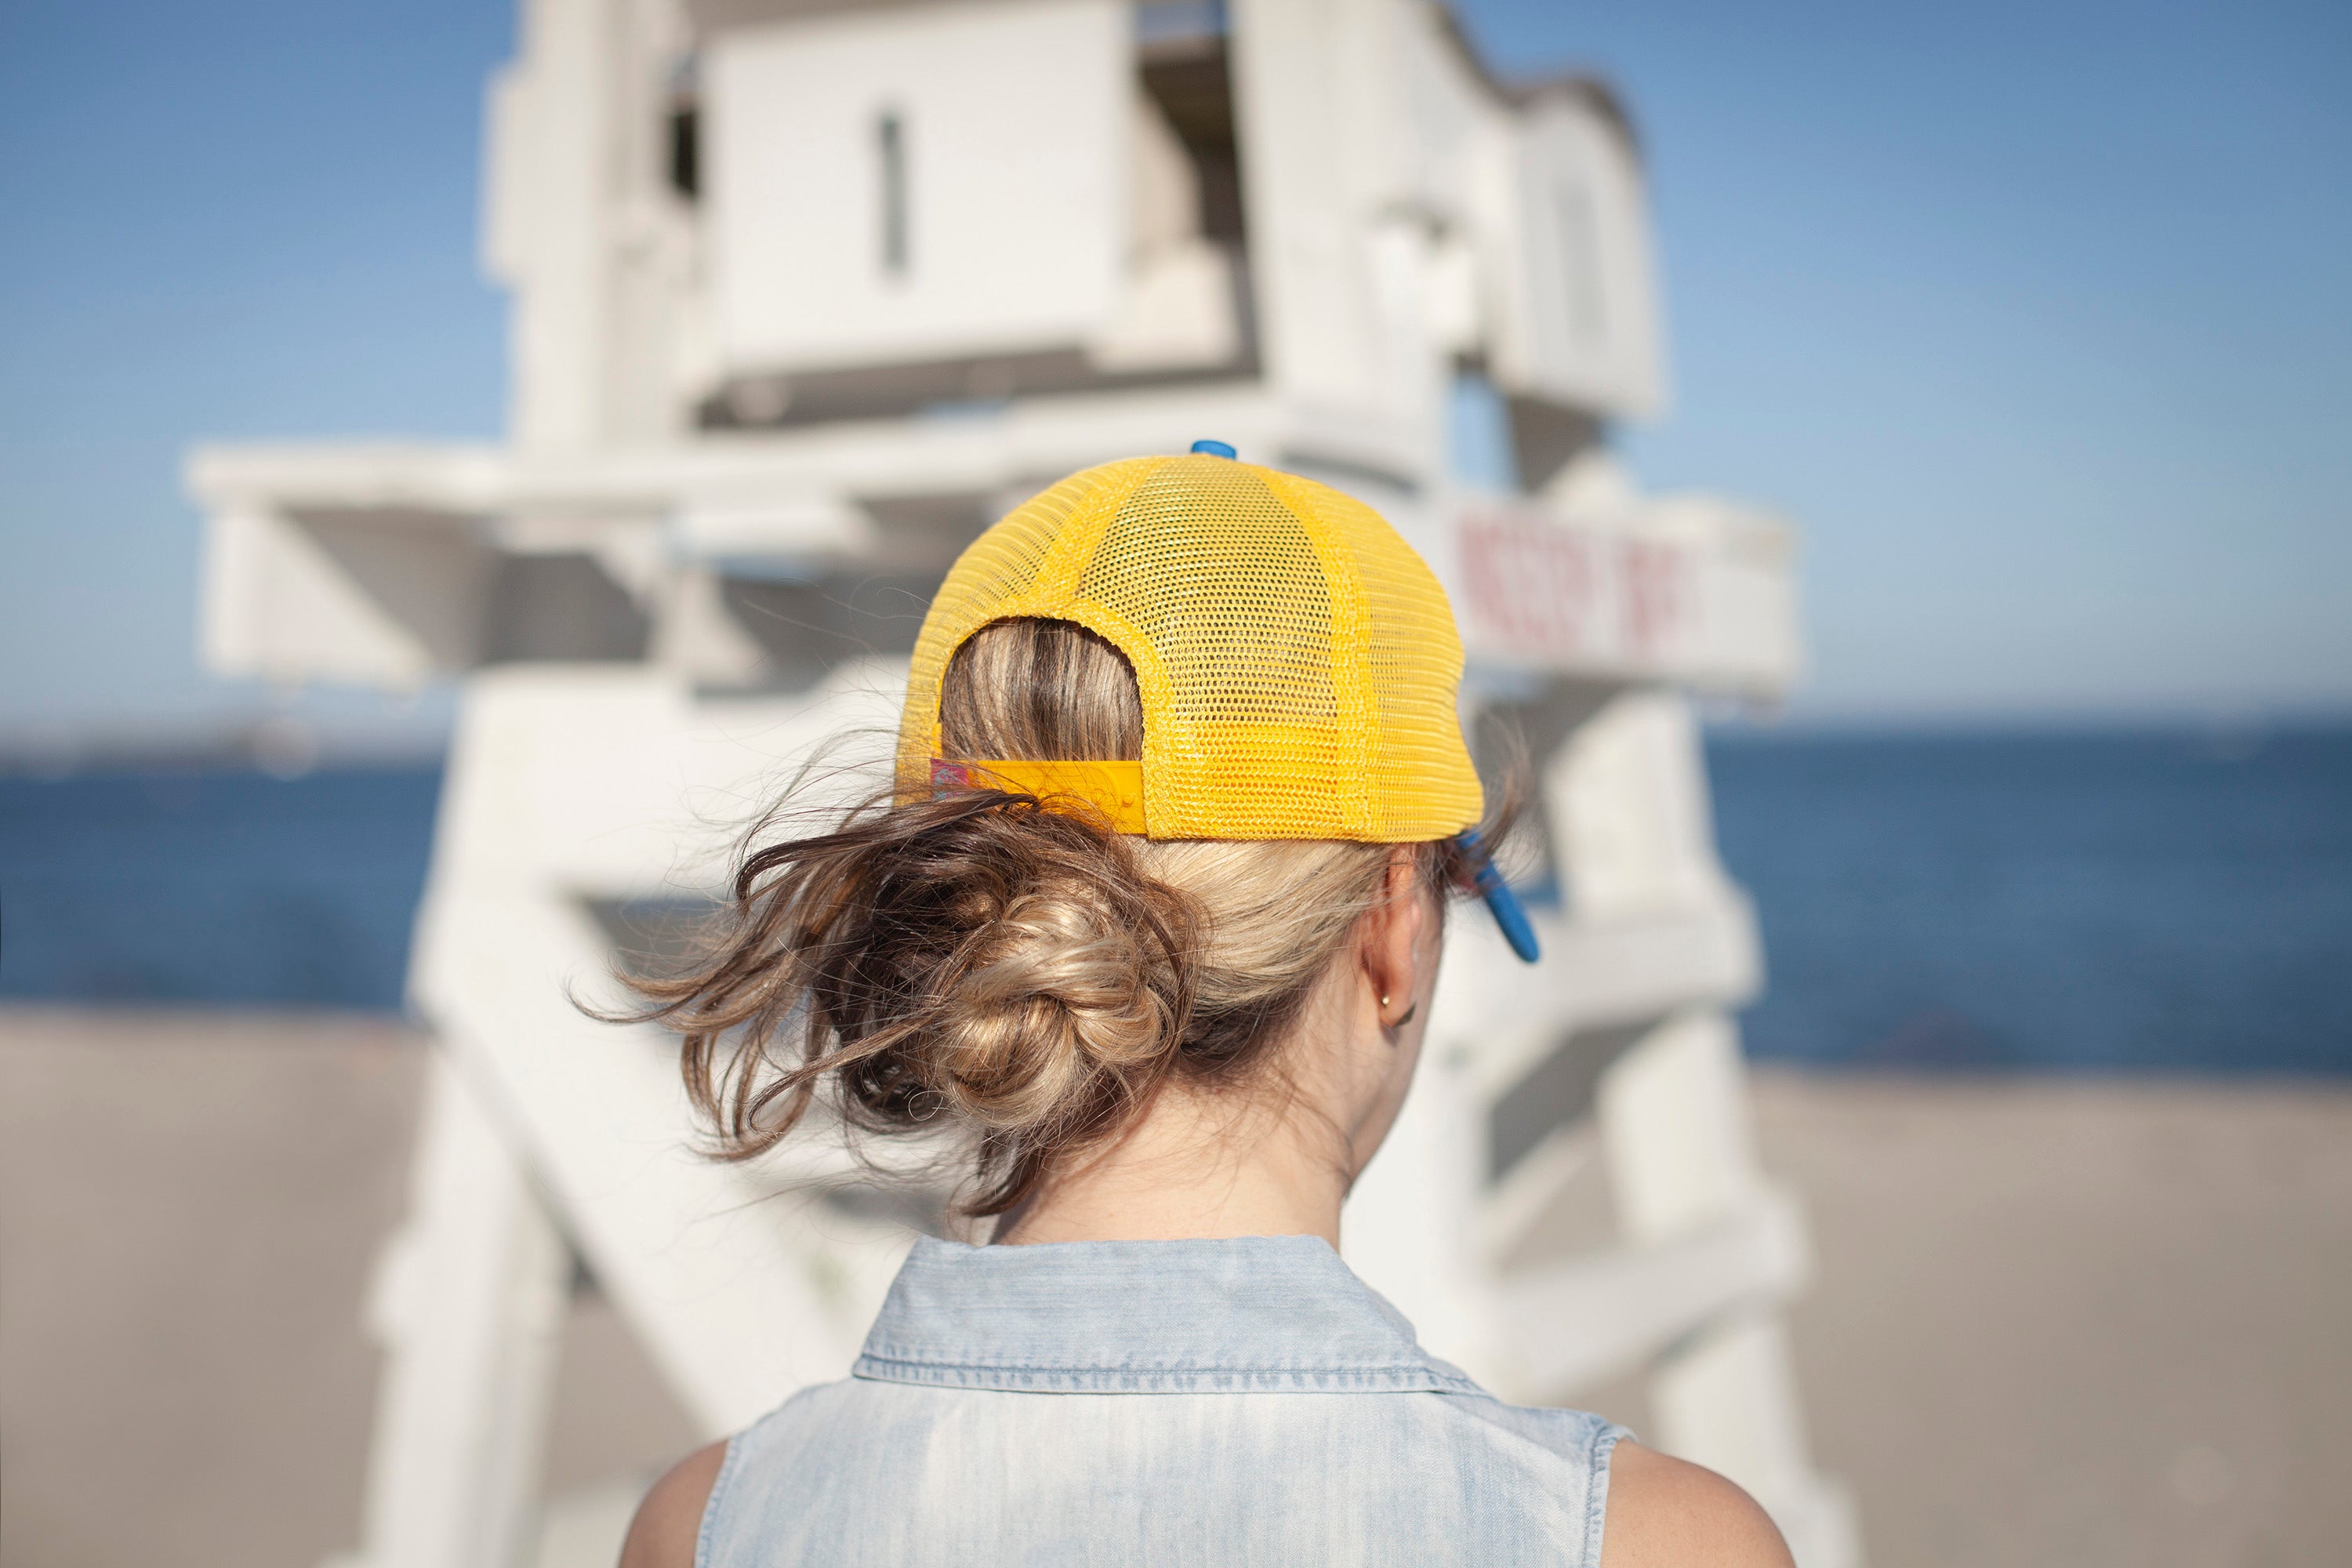 ShadyLady_SunnyLady_Front 2000 × 2000px Women’s Hats, Women’s Trucker Hats, Trucker Hats, Hats, Adjustable Hats, Everyday Use, Comfortable, Sun Rays, Sunny, Pattern, Beach Days, Outdoors, Sunny Days